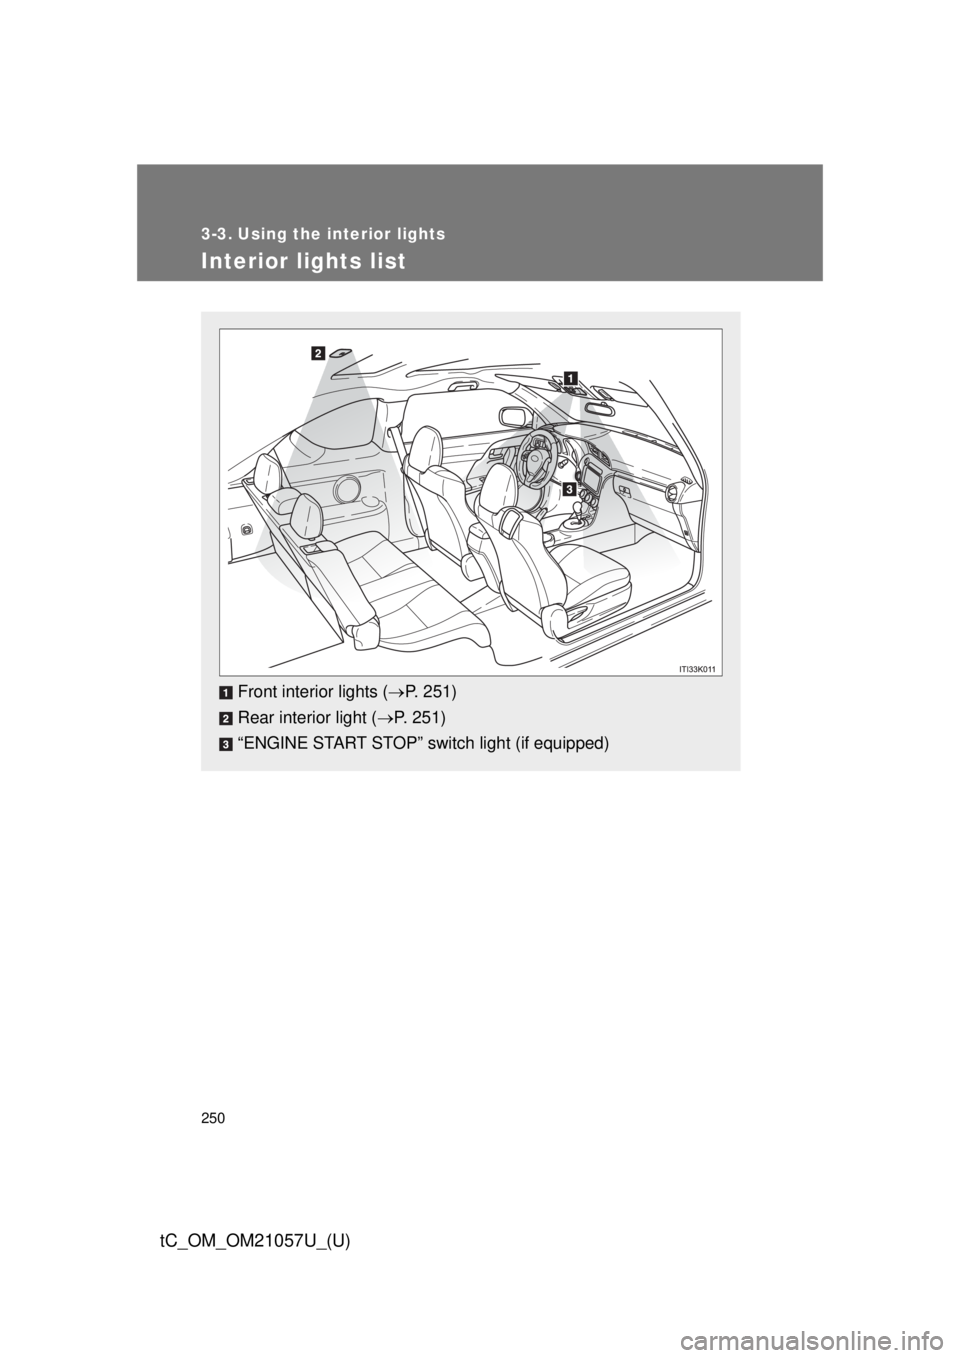 TOYOTA tC 2015   (in English) Owners Guide 250
tC_OM_OM21057U_(U)
3-3. Using the interior lights
Interior lights list
Front interior lights (P. 251)
Rear interior light ( P. 251)
“ENGINE START STOP” switch light (if equipped) 